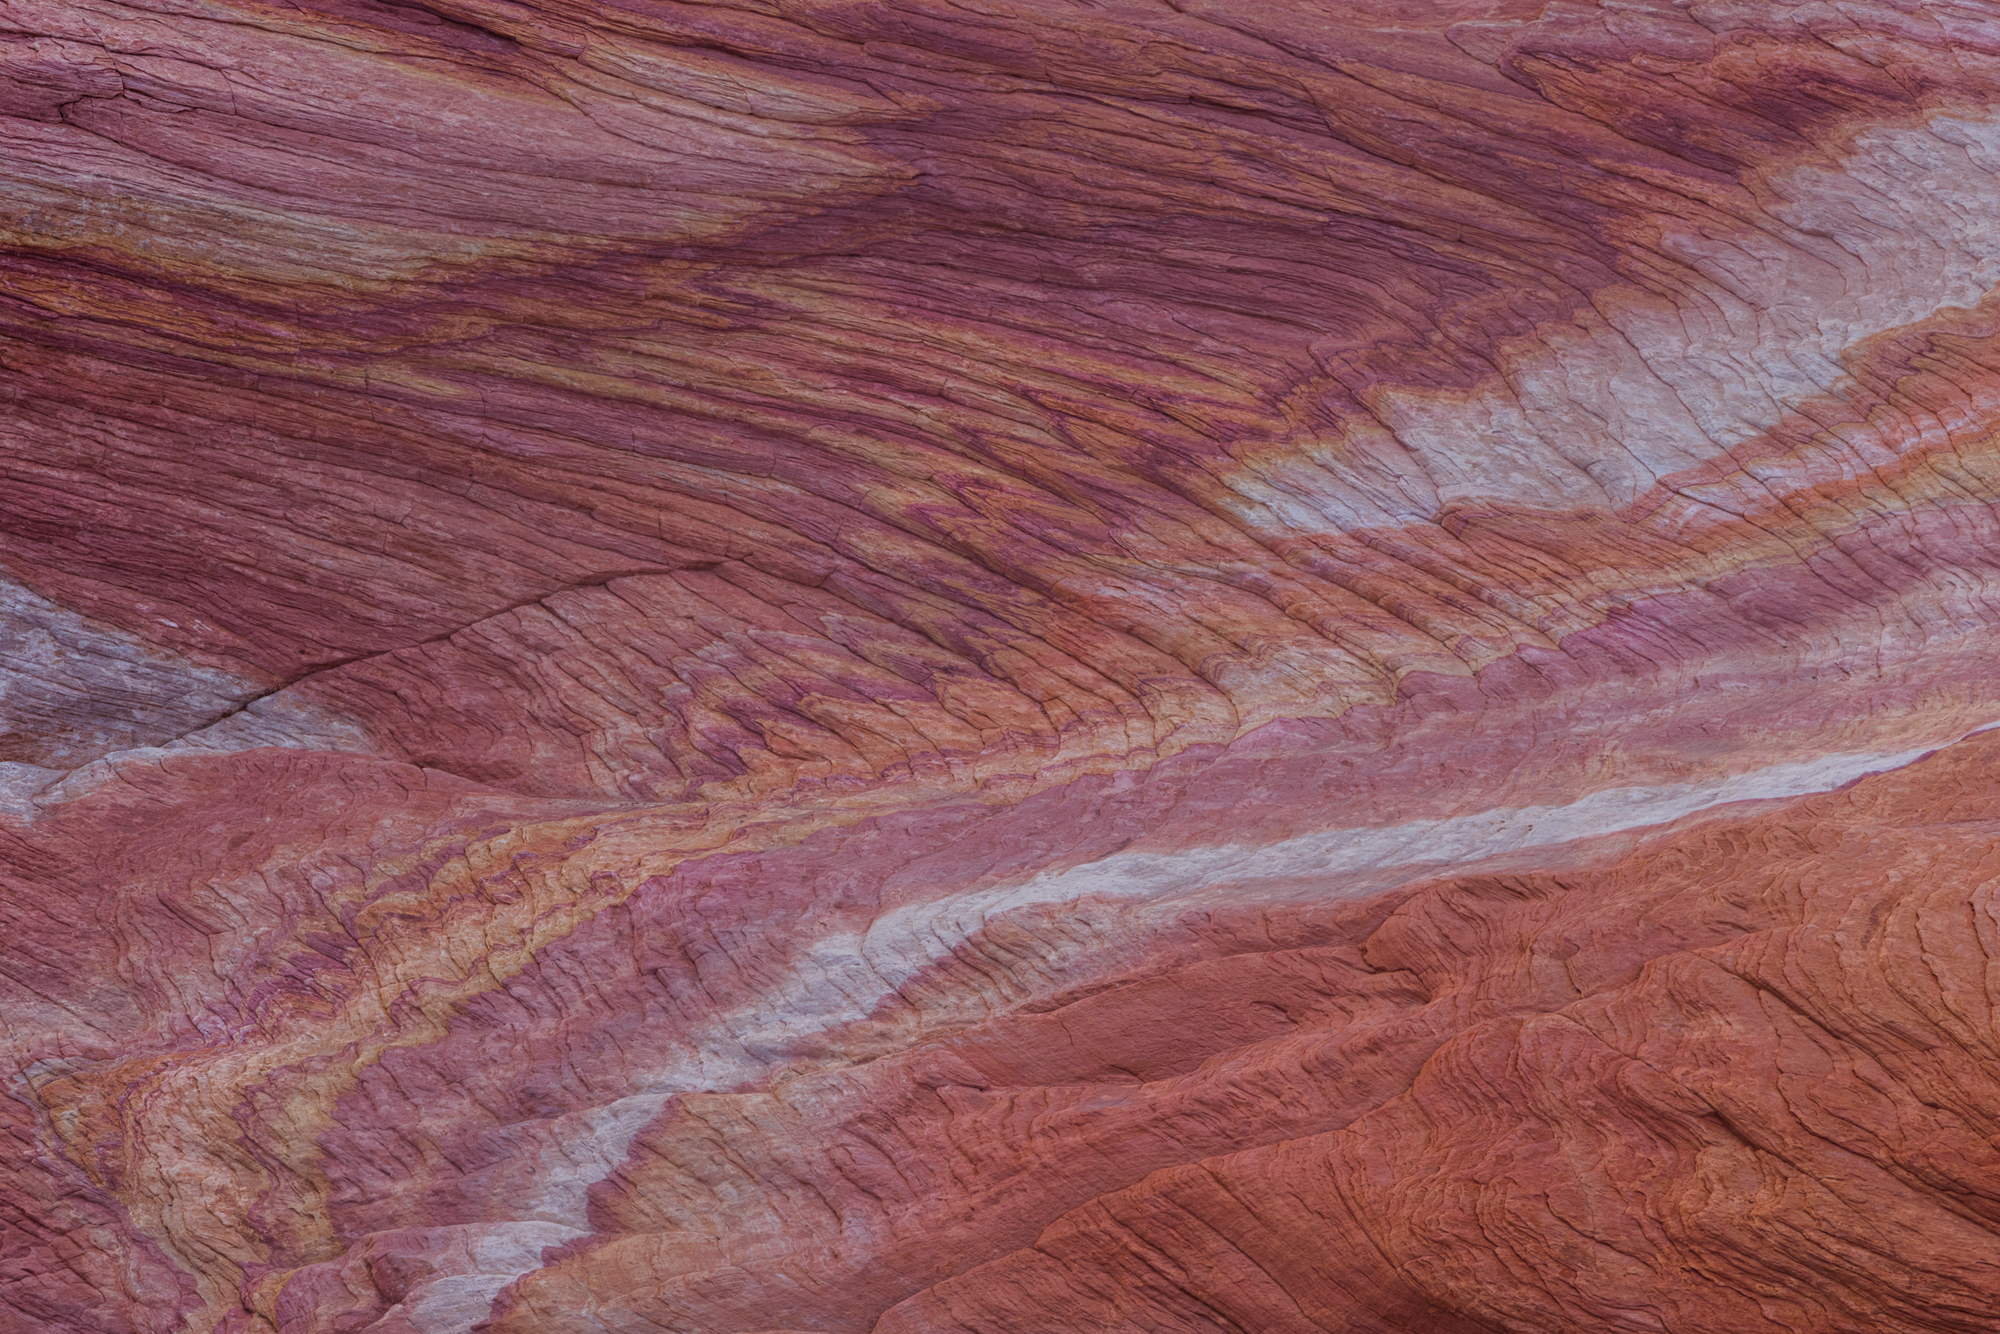 Abstract landscape photography of colorful geological formations and patterns in the desert of the American Southwest